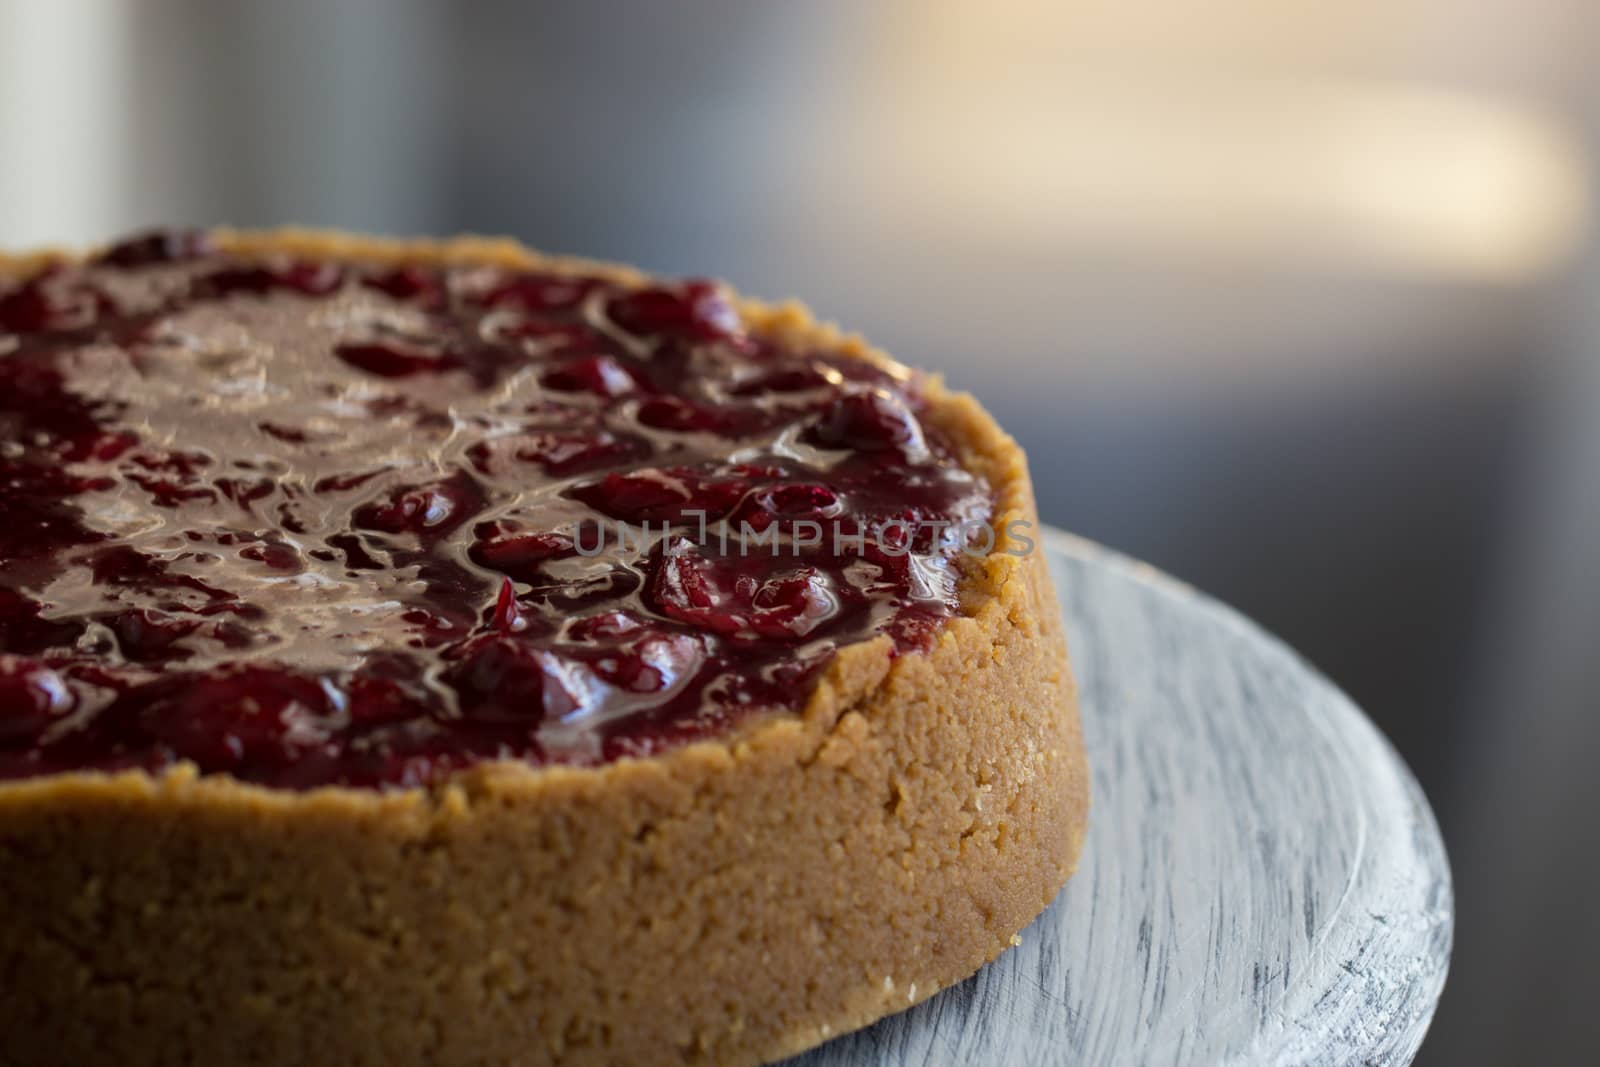 Cheesecake decorated with cherry sauce with berries